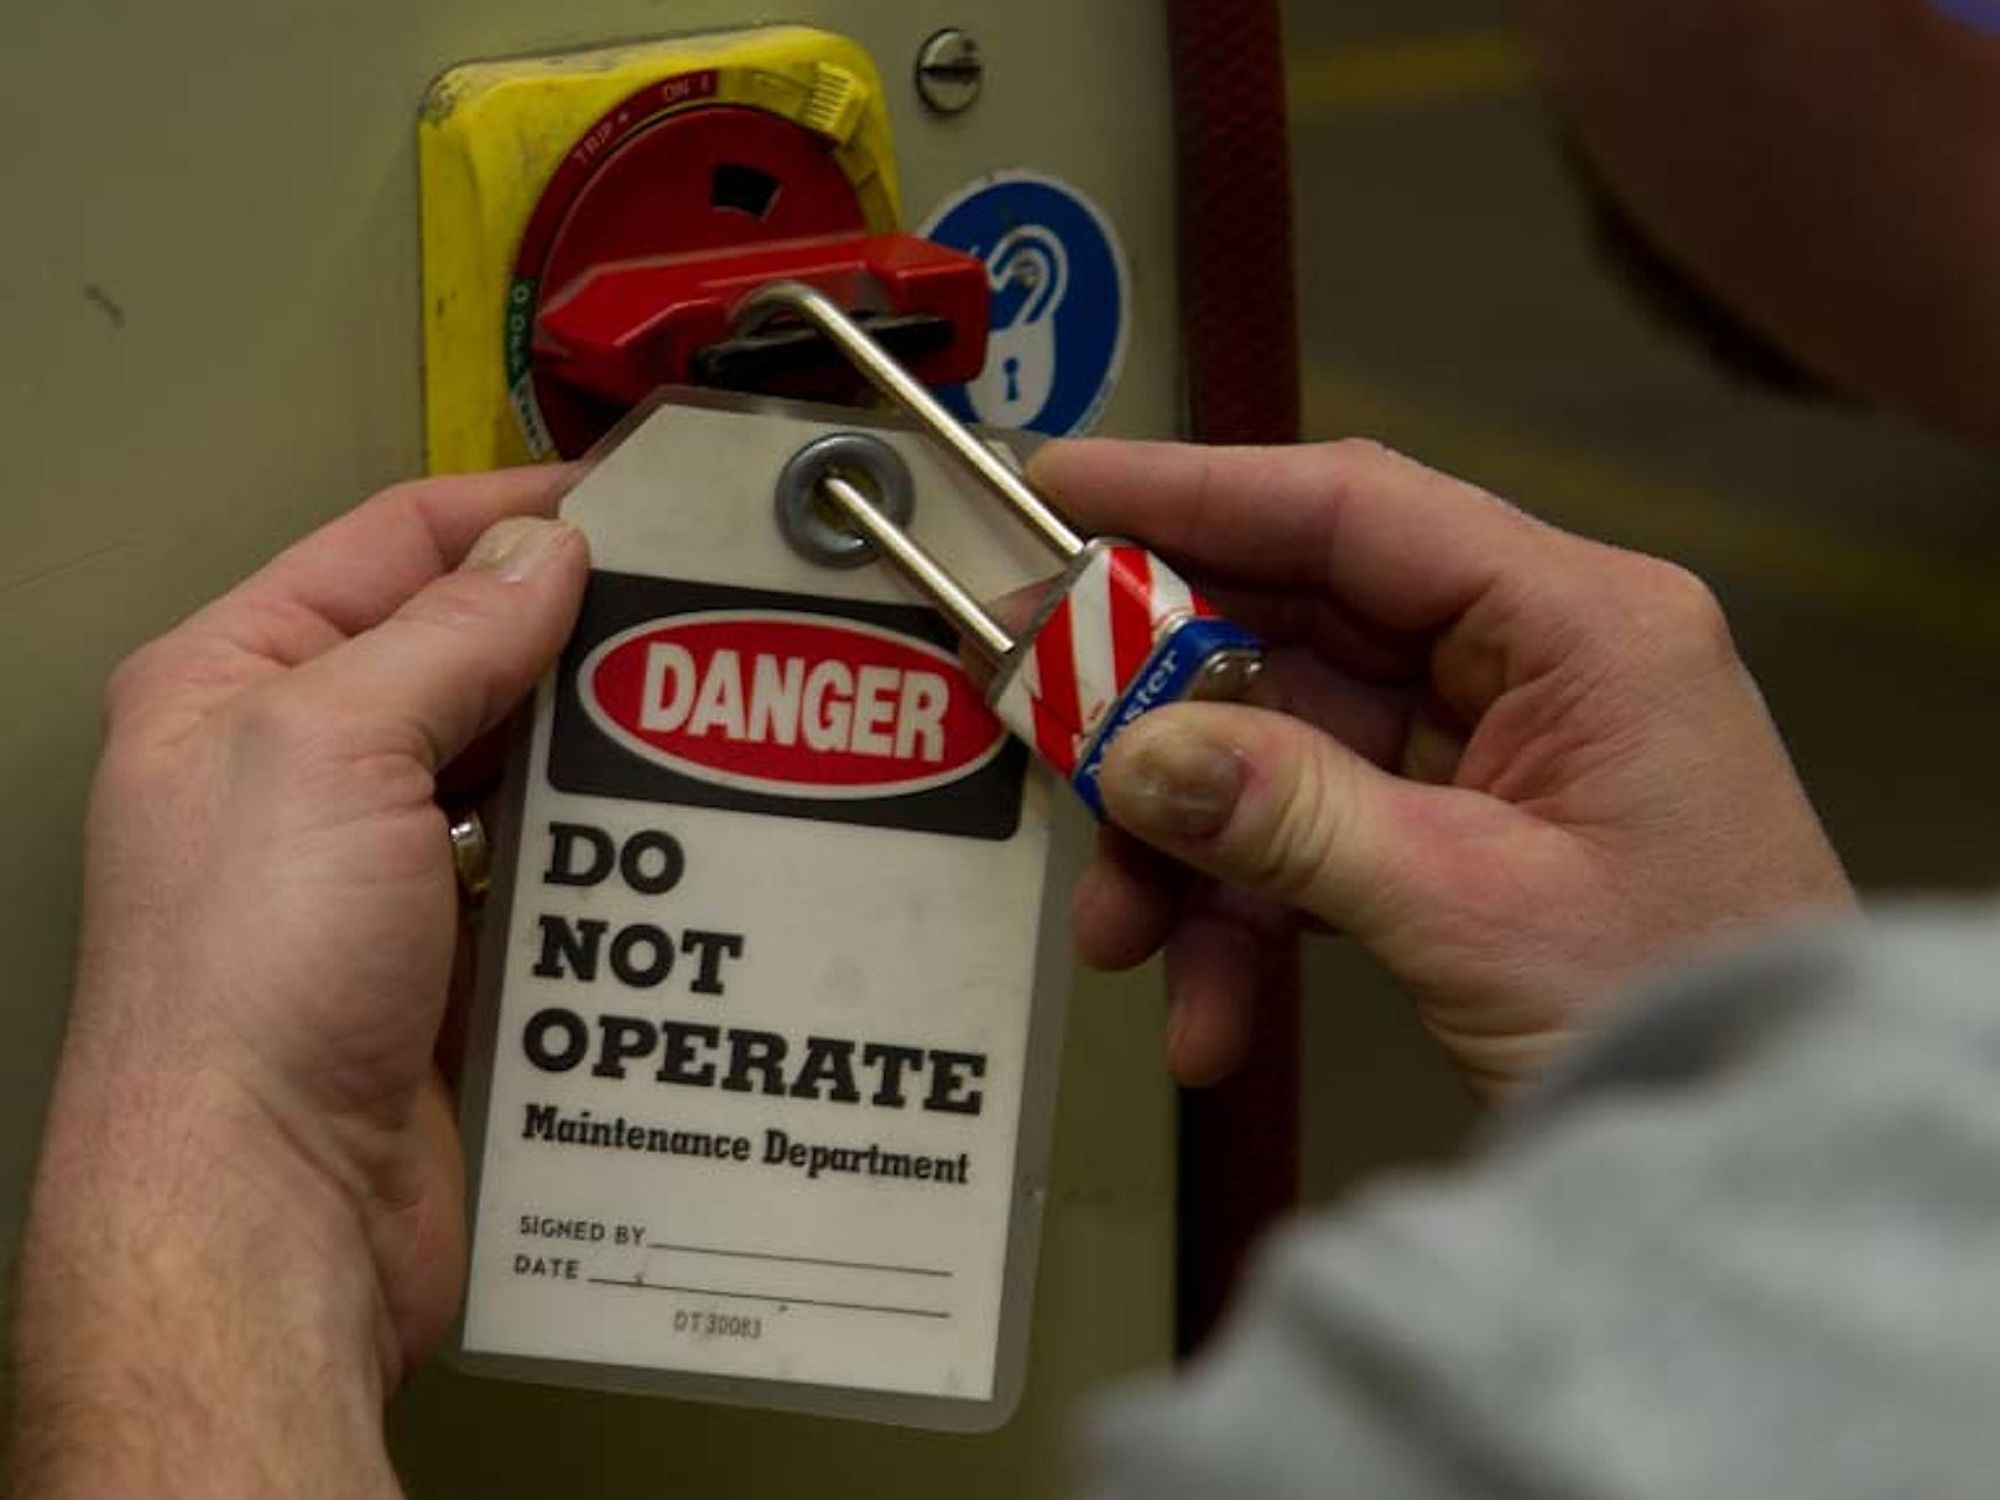 Limitations of tagout devices